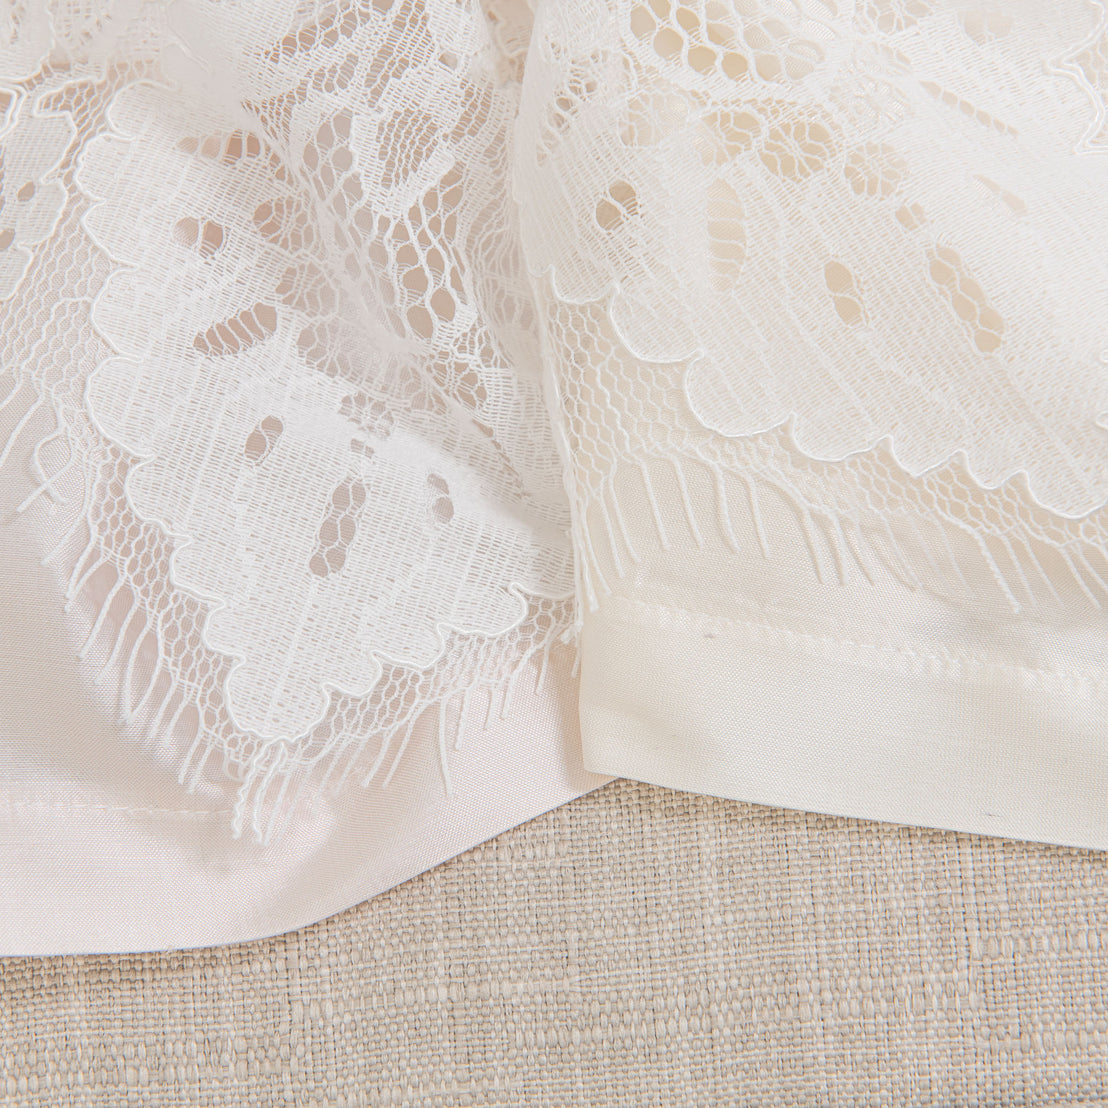 Close-up detail shot of the lace details on the Victoria Christening Gown. Two different colors shown - ivory and pink.